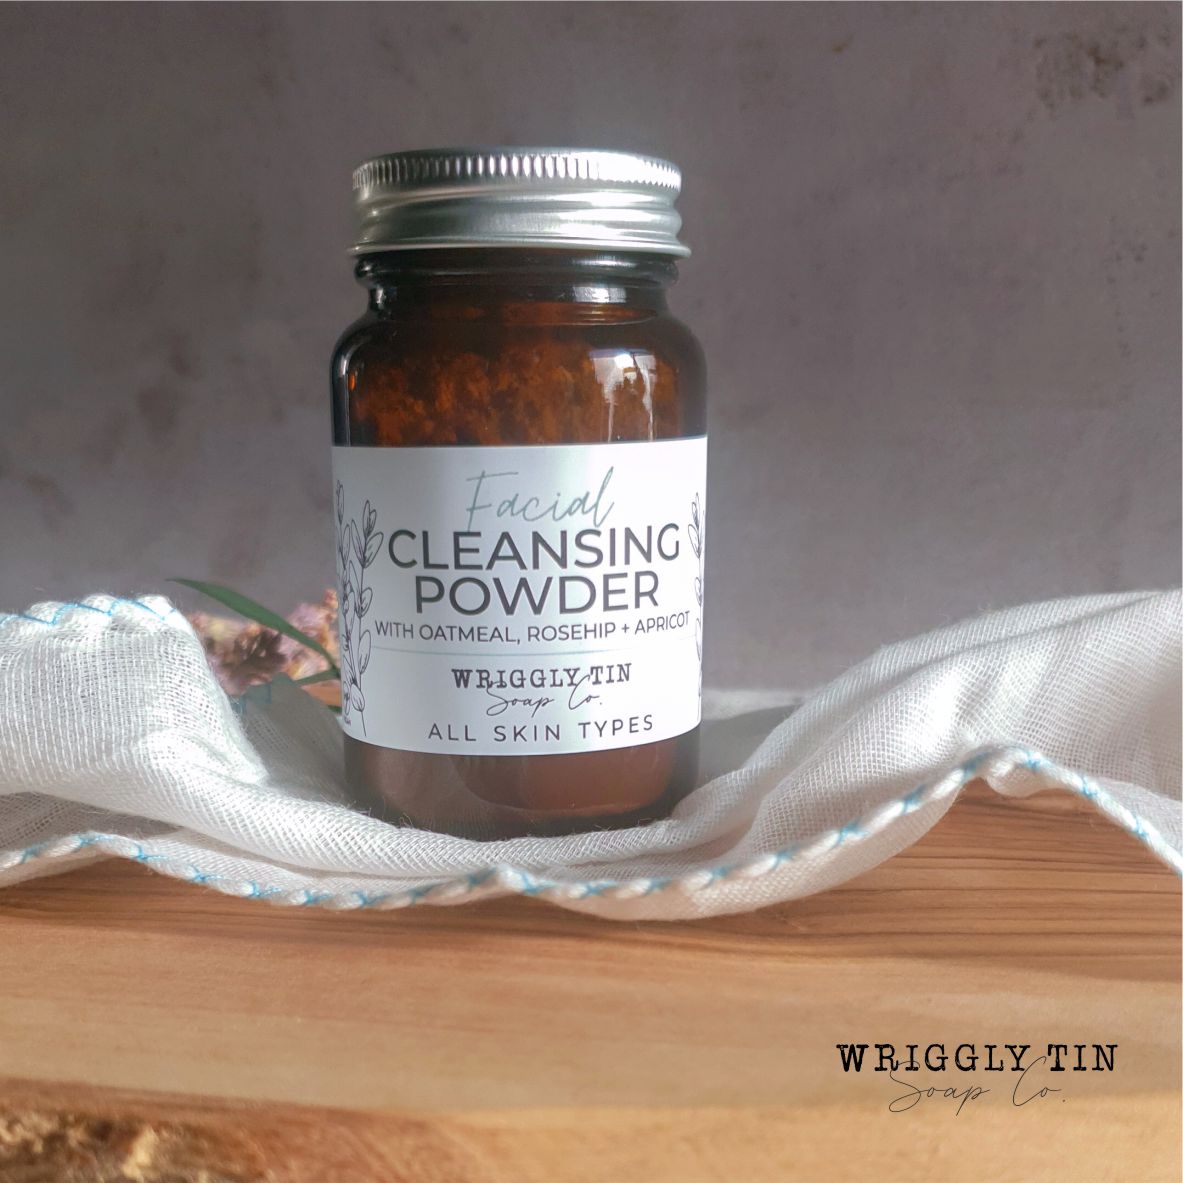 FACIAL CLEANSING POWDER - With Oatmeal, Rosehip + Apricot